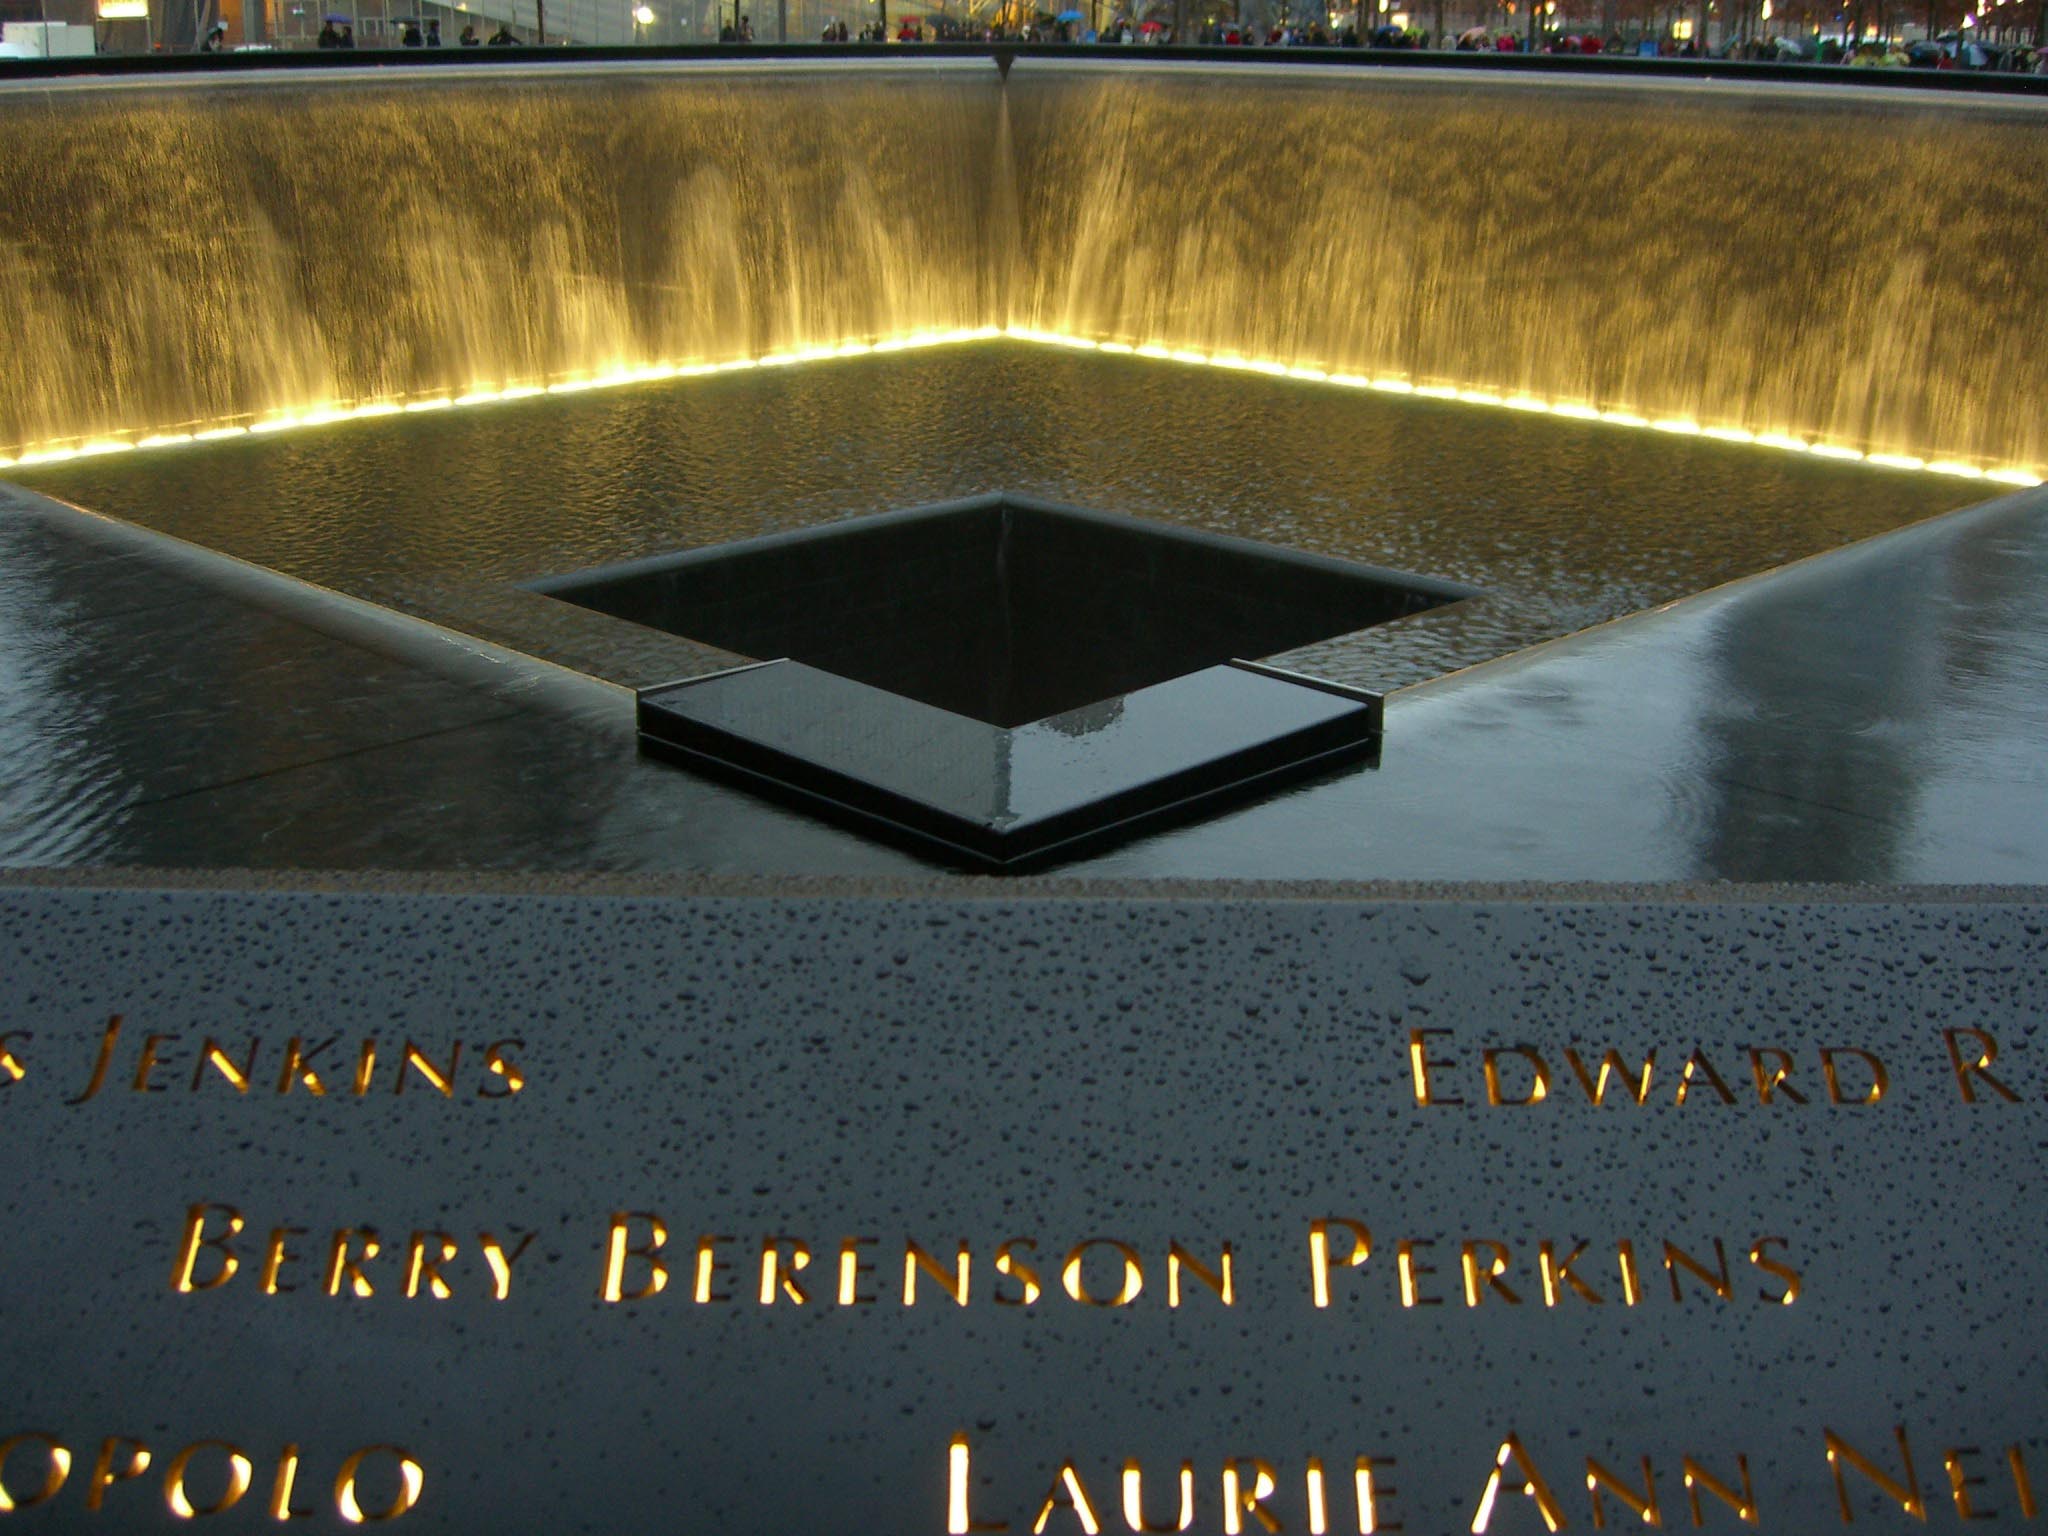 Photo of the The 9/11 Memorial - a hole where the tower was, surrounded by light and white, with the camera zooming on a victim's name.